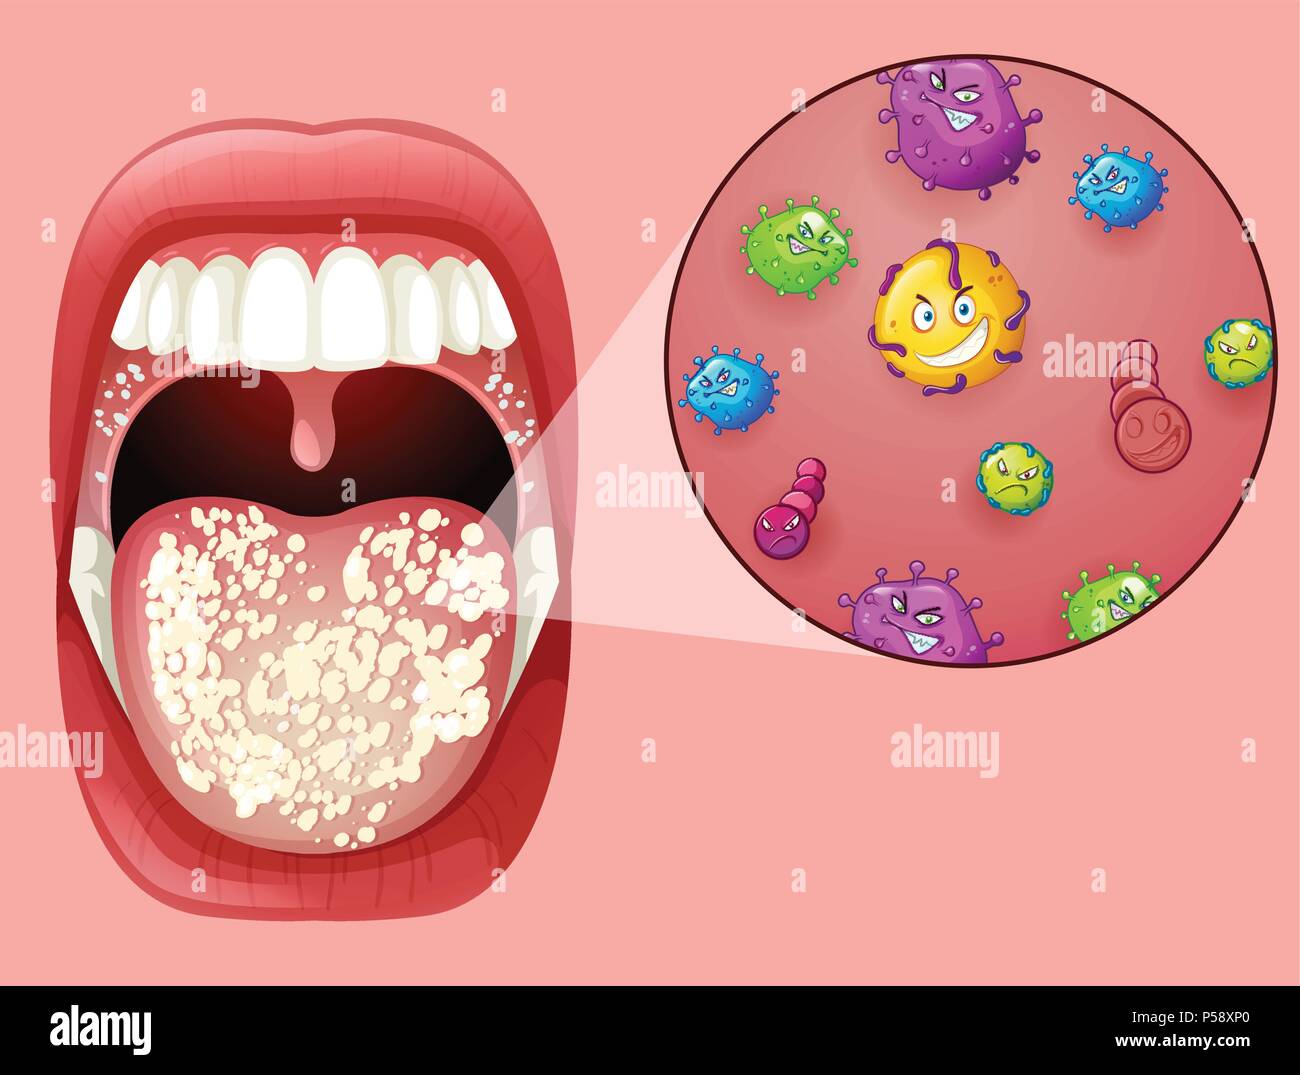 Human Mouth with Oral Thrush illustration Stock Vector